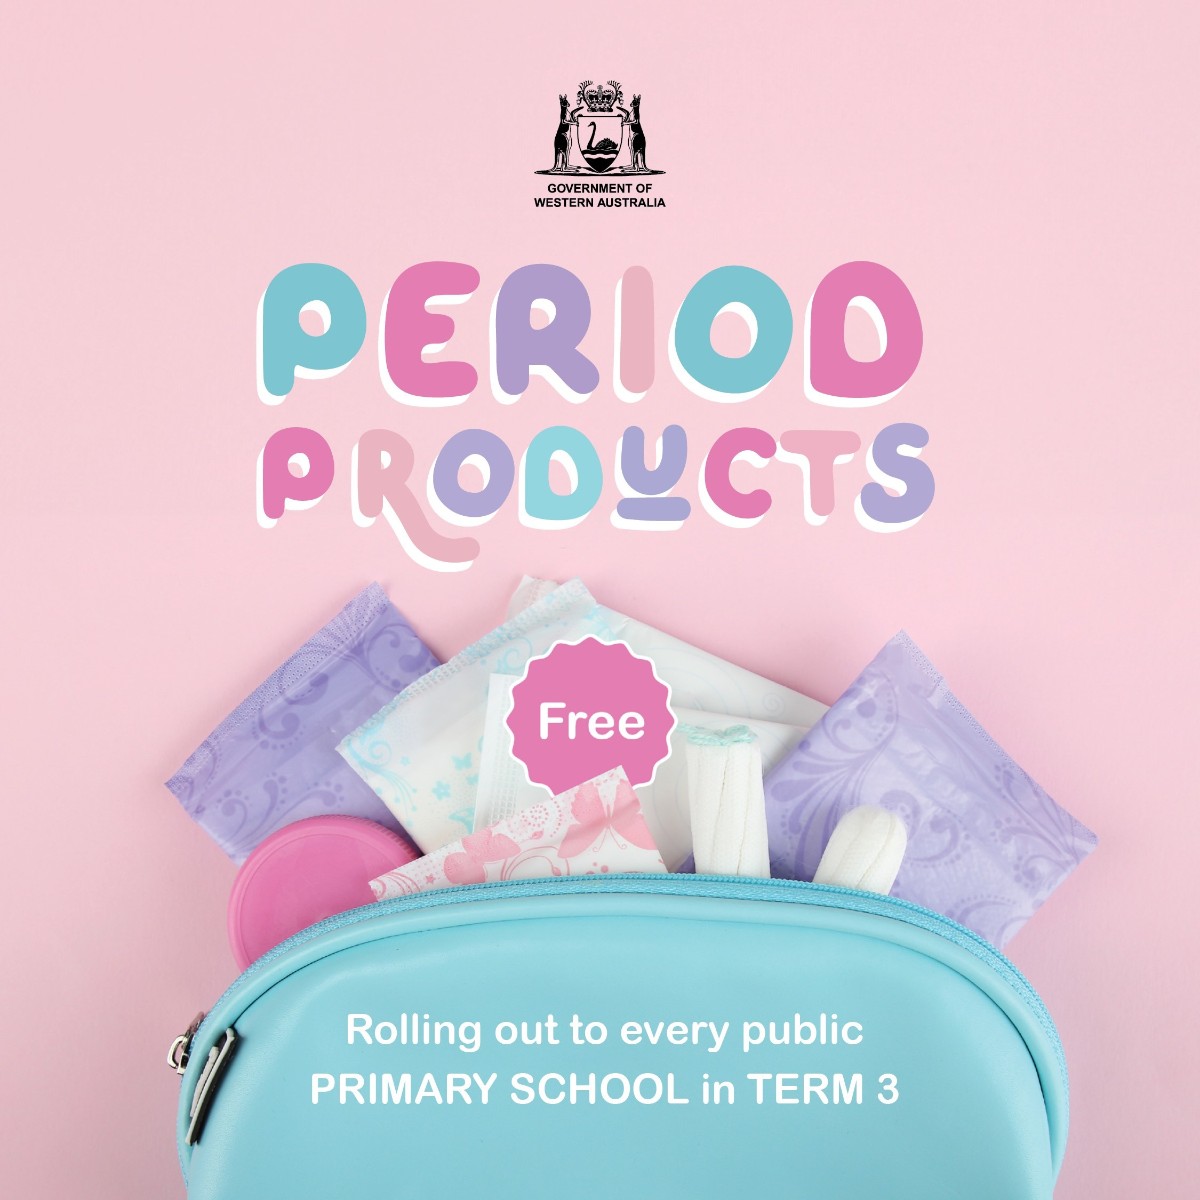 Starting in Term 3, free period products will be available to WA's public primary schools. Free period products are already available at more than 220 secondary schools and all WA TAFE colleges.